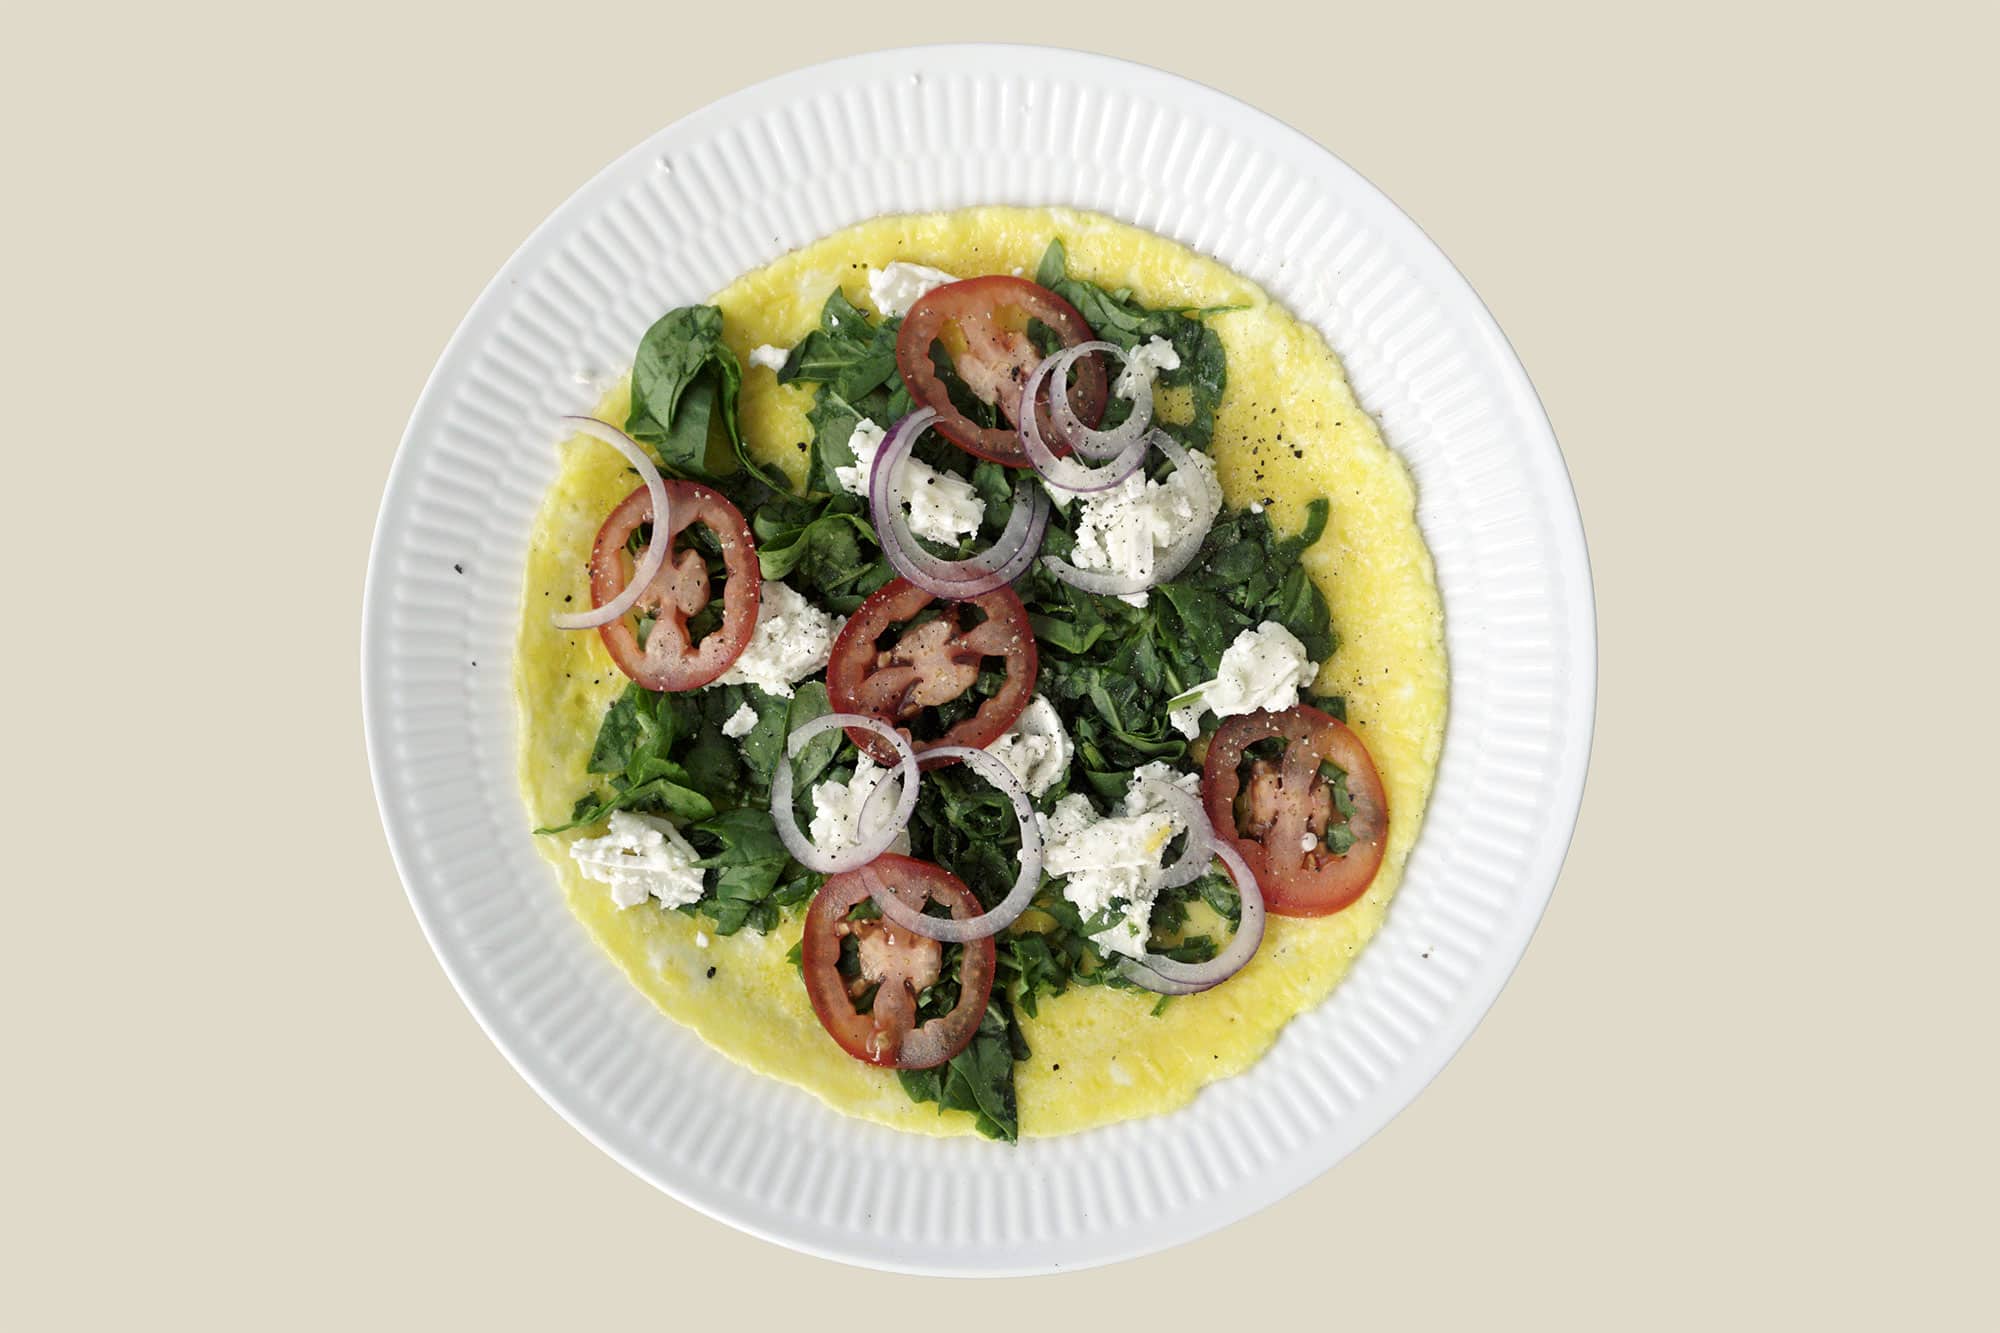 Goatchella: Omelet w. Fresh Spinach, Goat Cheese, Tomato & Red Onion